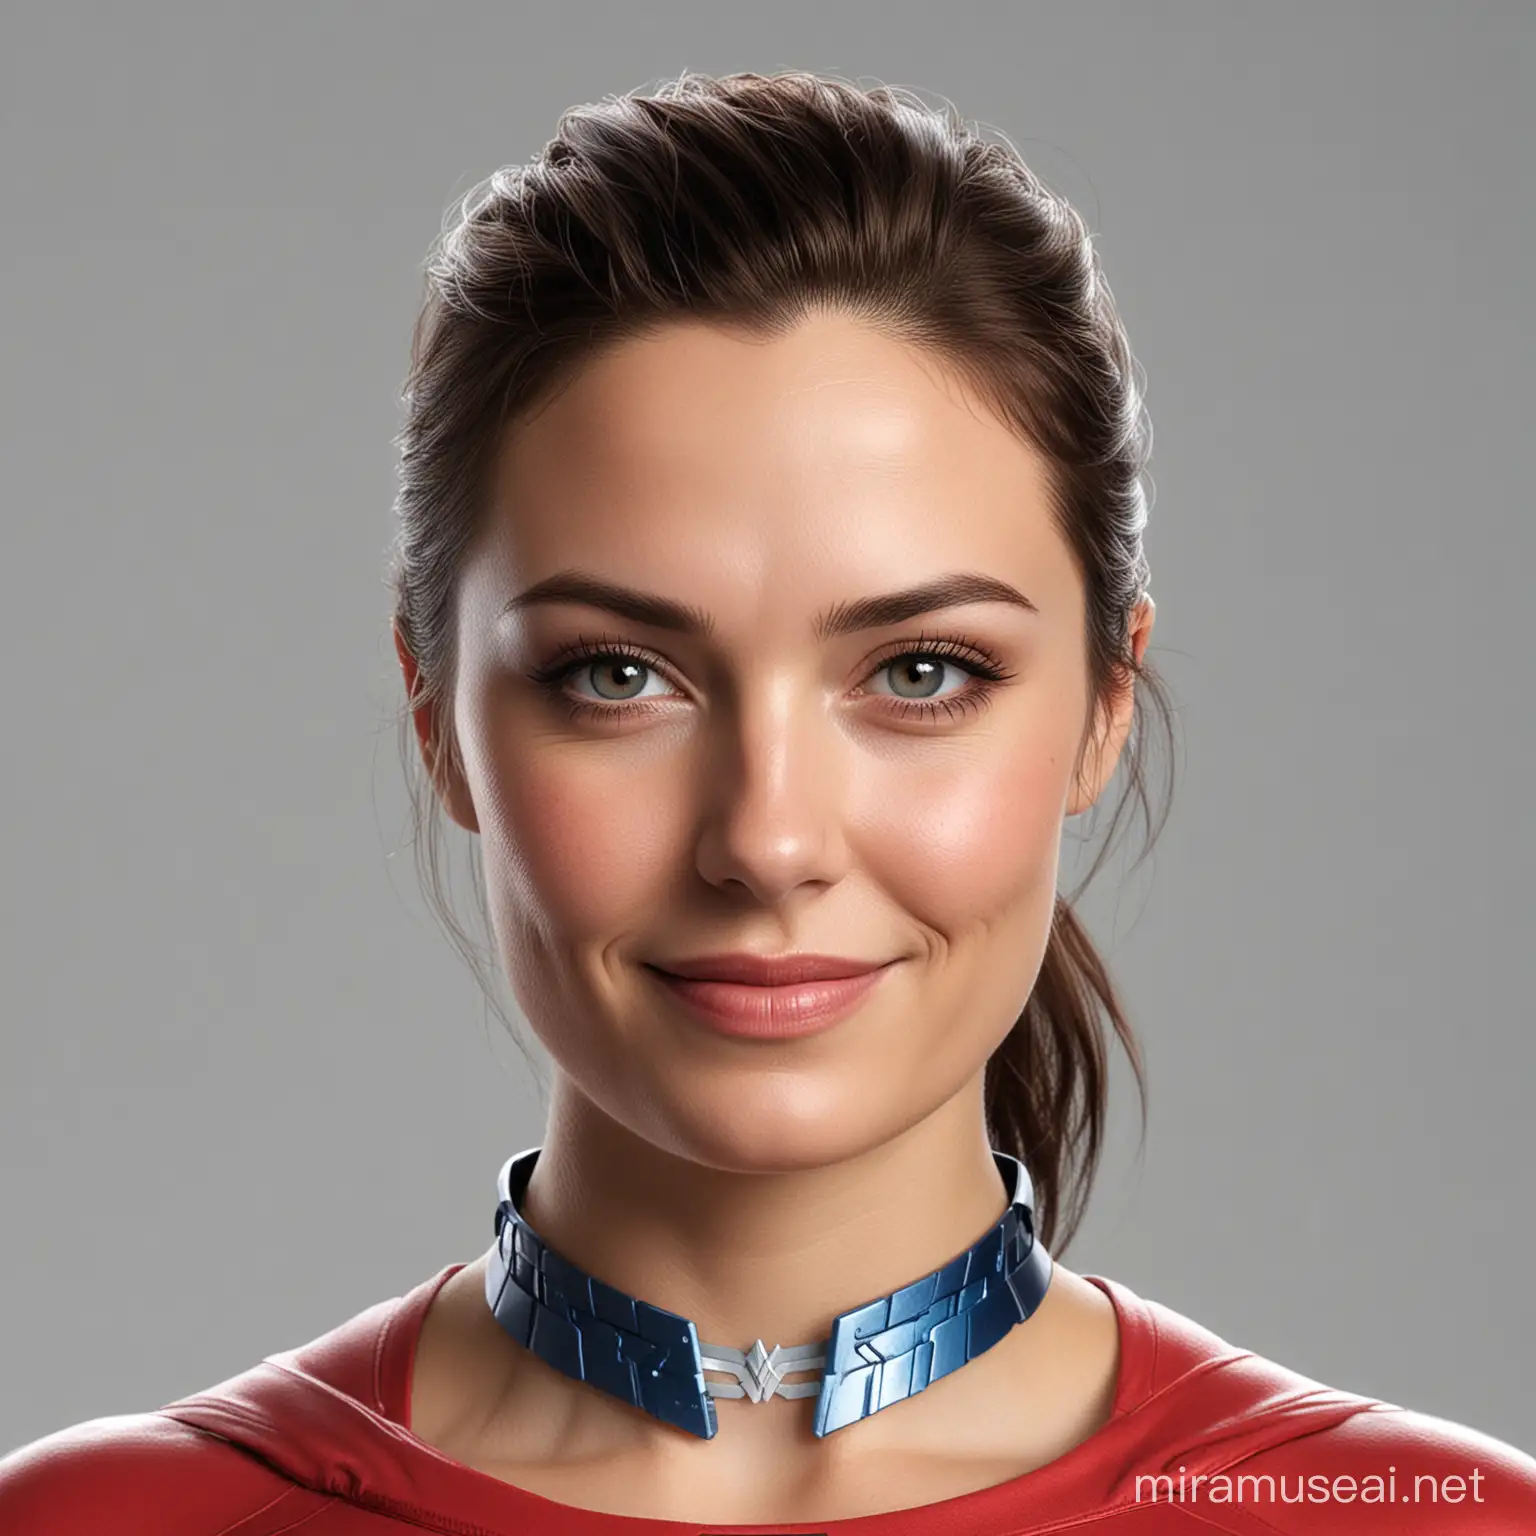 Marvel-style character from the future, similar to Wonder Woman, with 29 years old,  rounded face, facing the camera, head close up,smiling face, no colored marks or scars in the face.

Attire: Blue and red attire, futuristic style, no high colar, using a T-shirt.

Background: white background

Photographed with: Canon 5D Mark IV, 60mm lens

Photo style: Portrait, facing to the camera

Description: soft skin, no beard, with a large forehead.